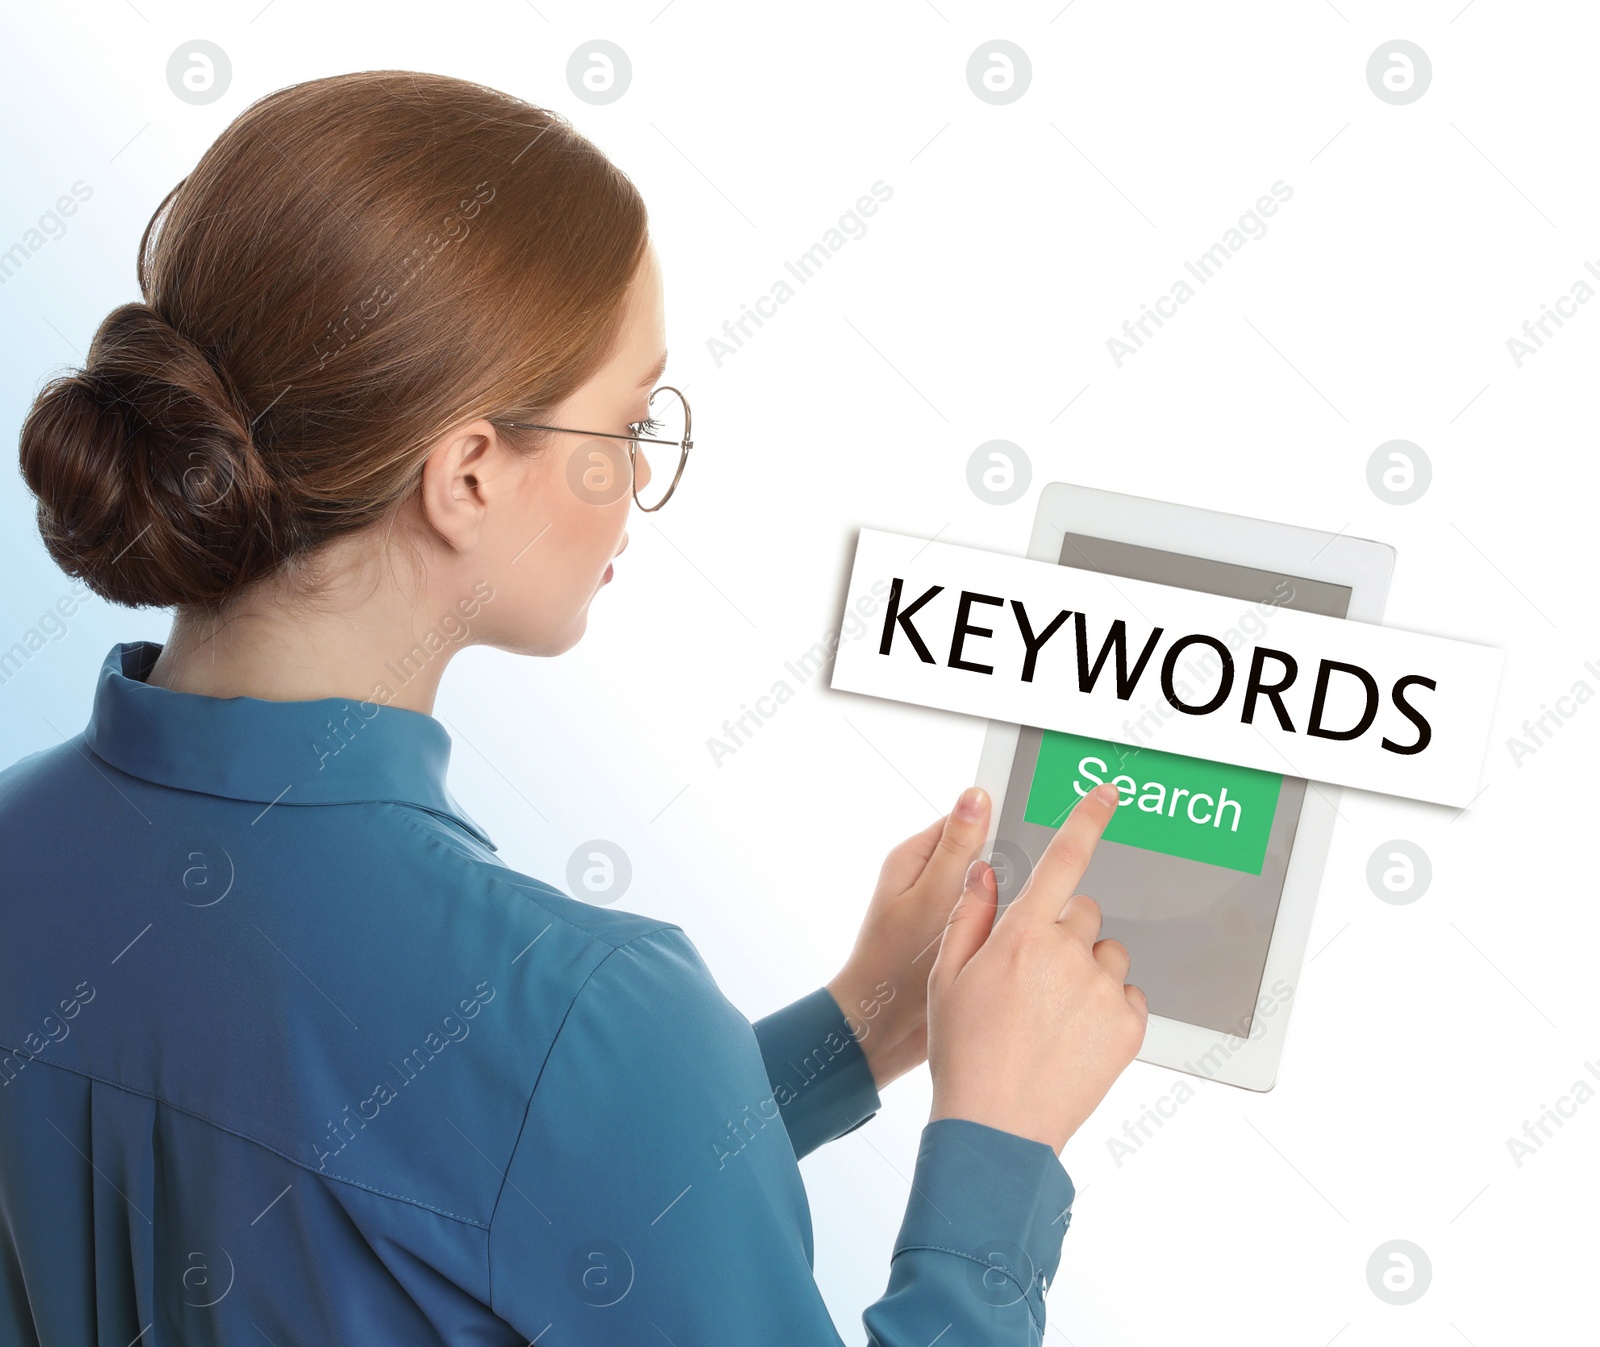 Image of Woman with tablet searching for keywords on white background